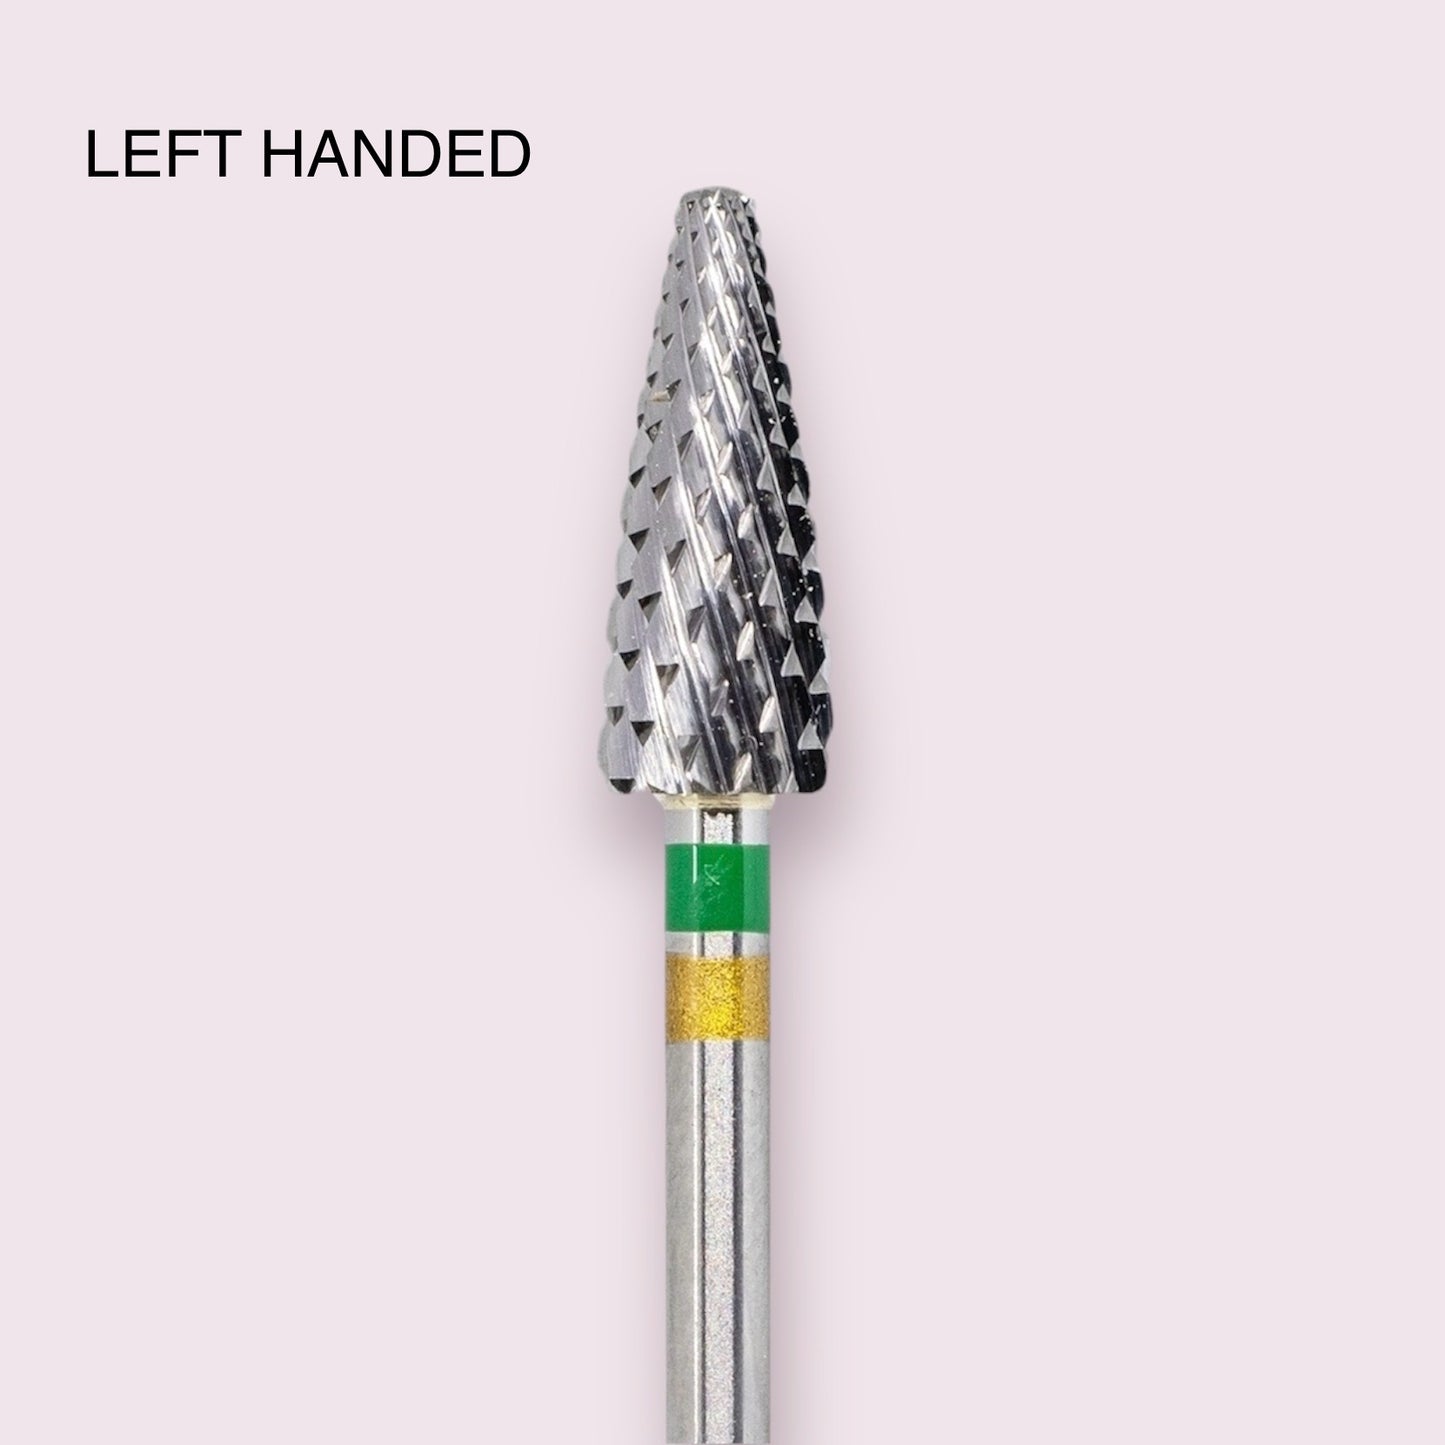 Nail Bit for Removal, Green 406001 LEFT handed (1pc)